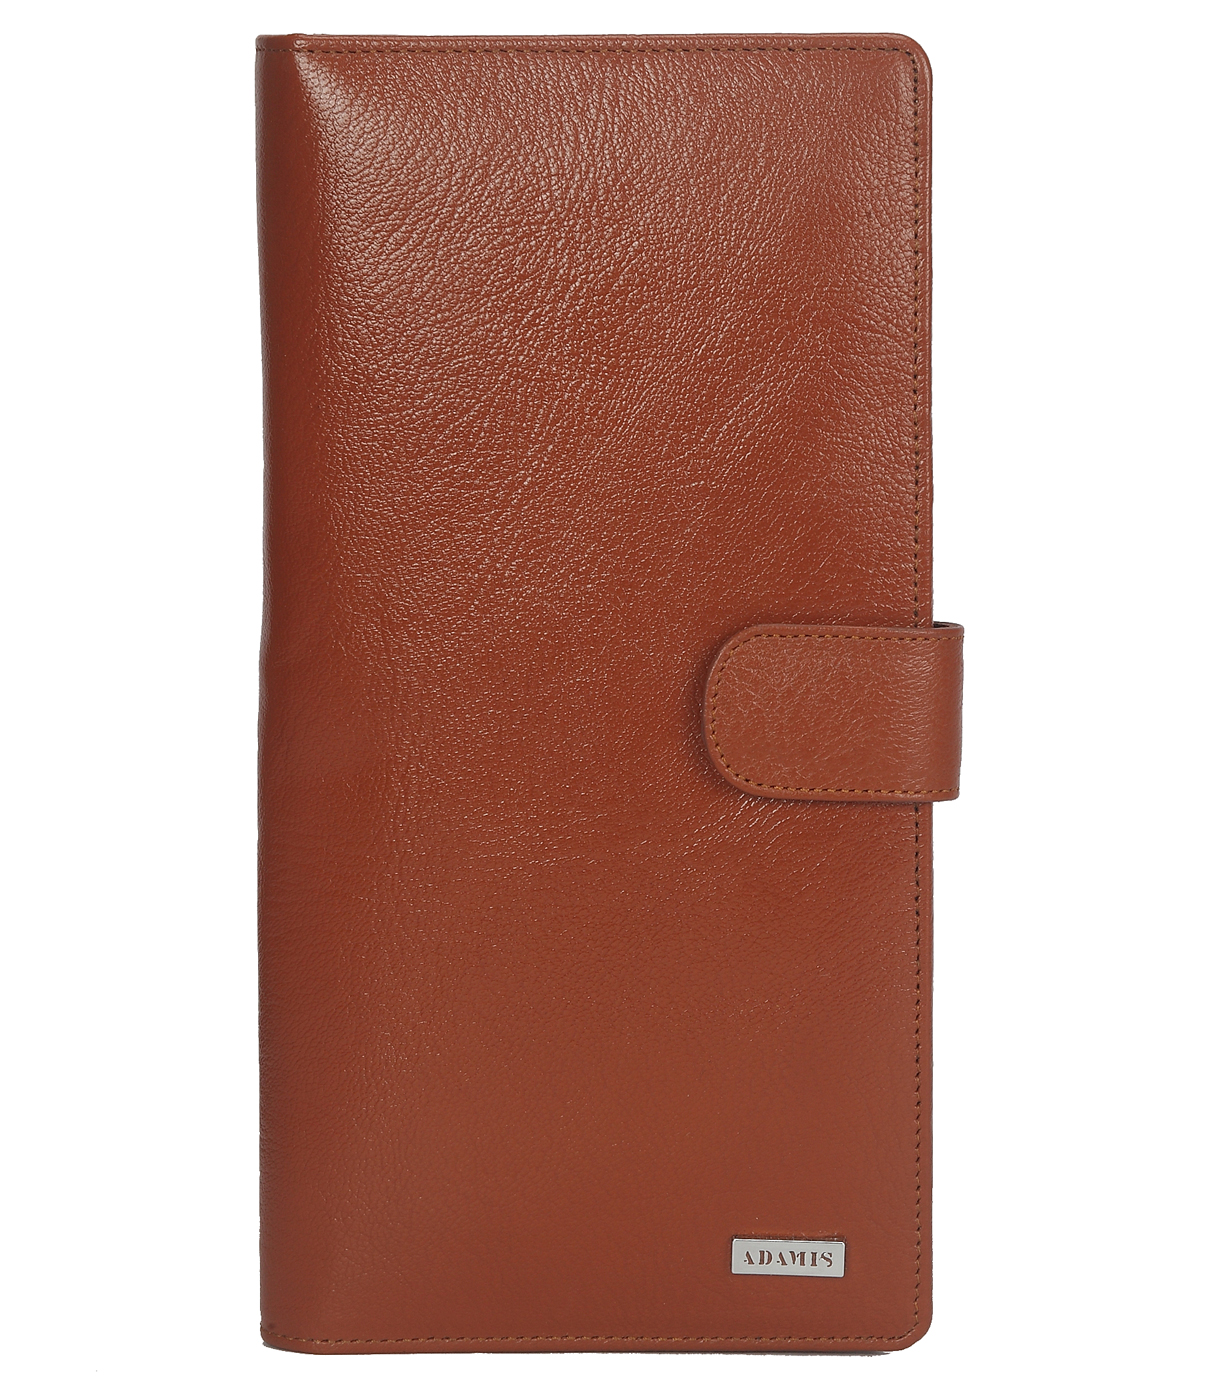 Wallet-Cynthia-Unisex wallet for travel documents in Genuine Leather - Tan